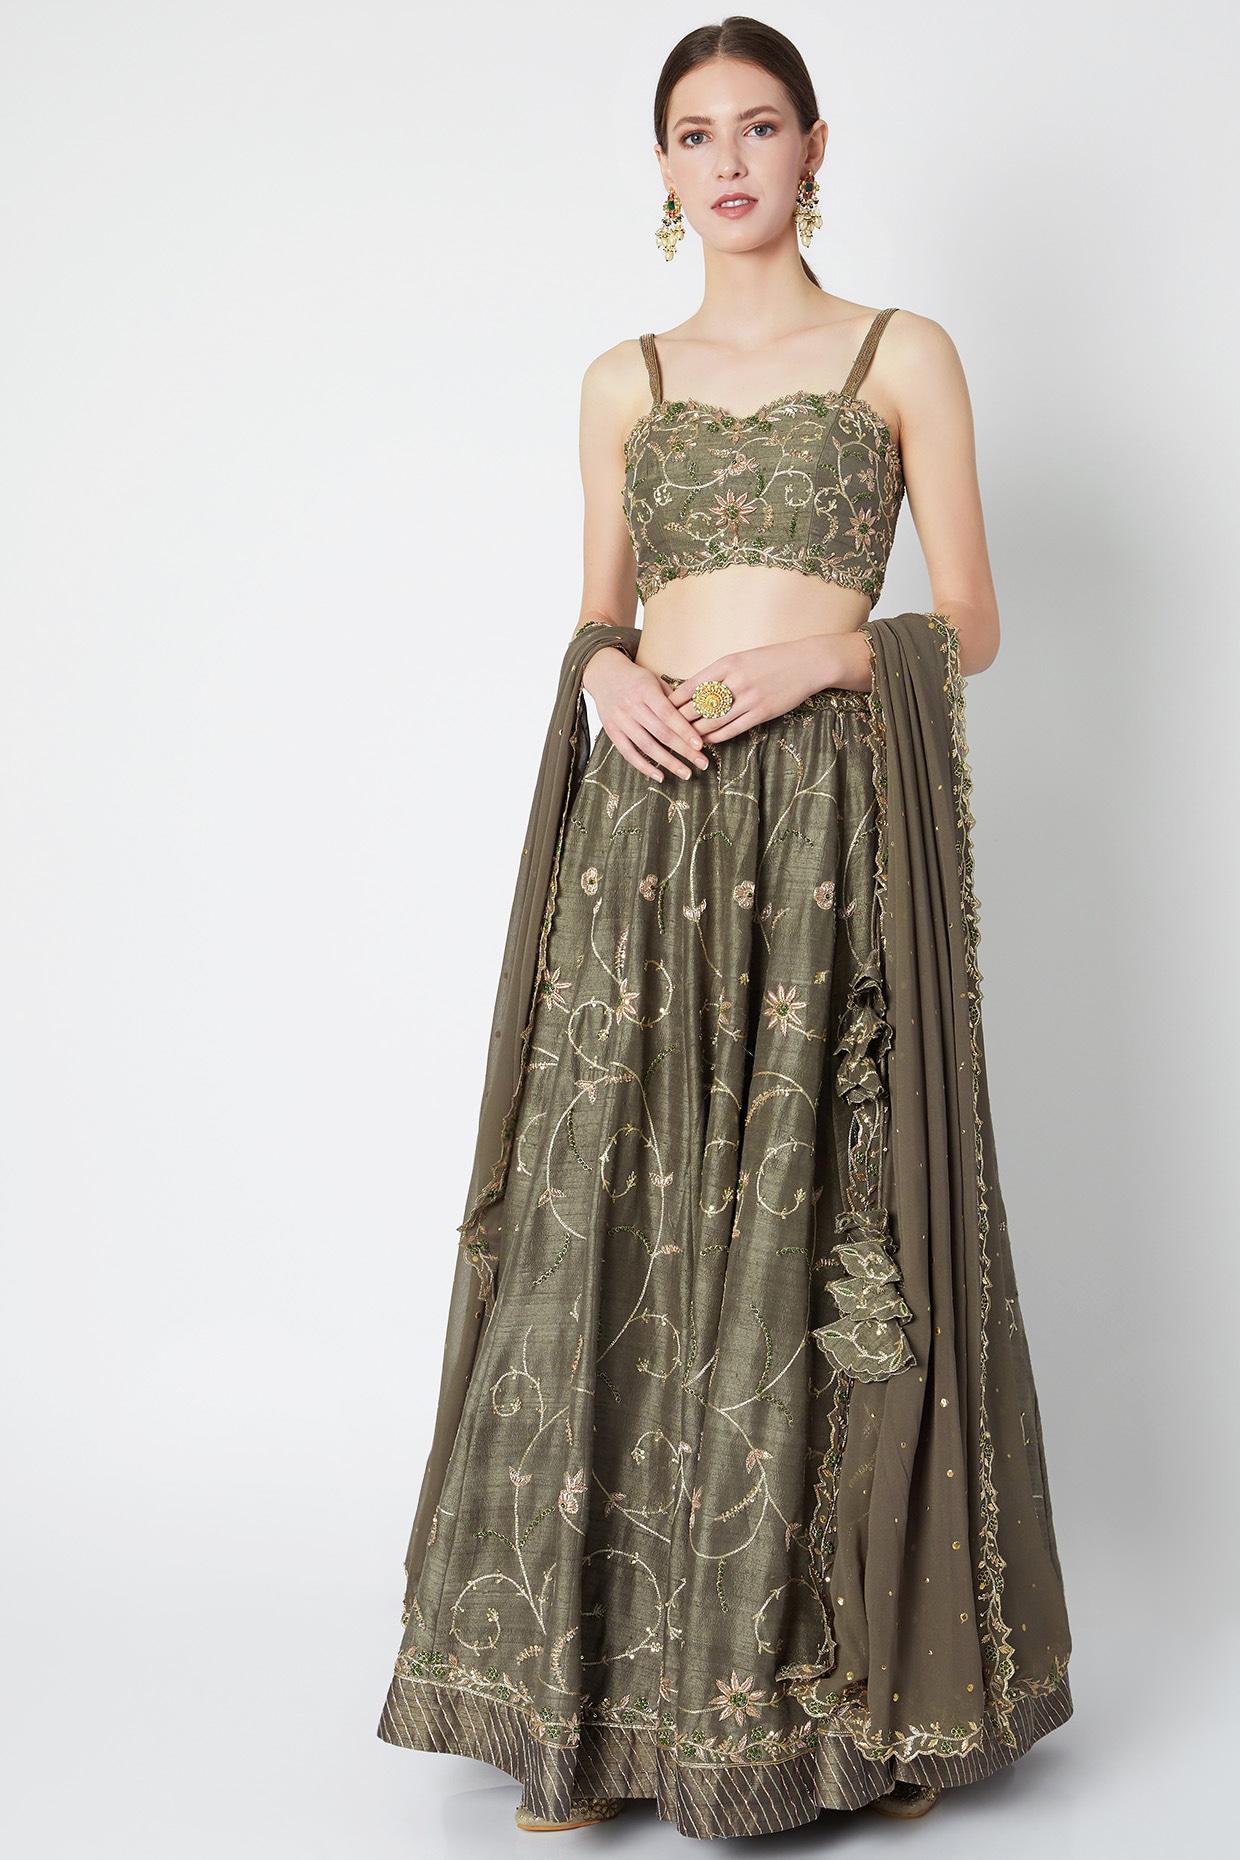 Olive Green Soft Net Lehenga Choli With Chine Sequence Work and Dupatta for  Women, Indian Lehenga, Bridesmaid Outfit, Wedding Wear - Etsy